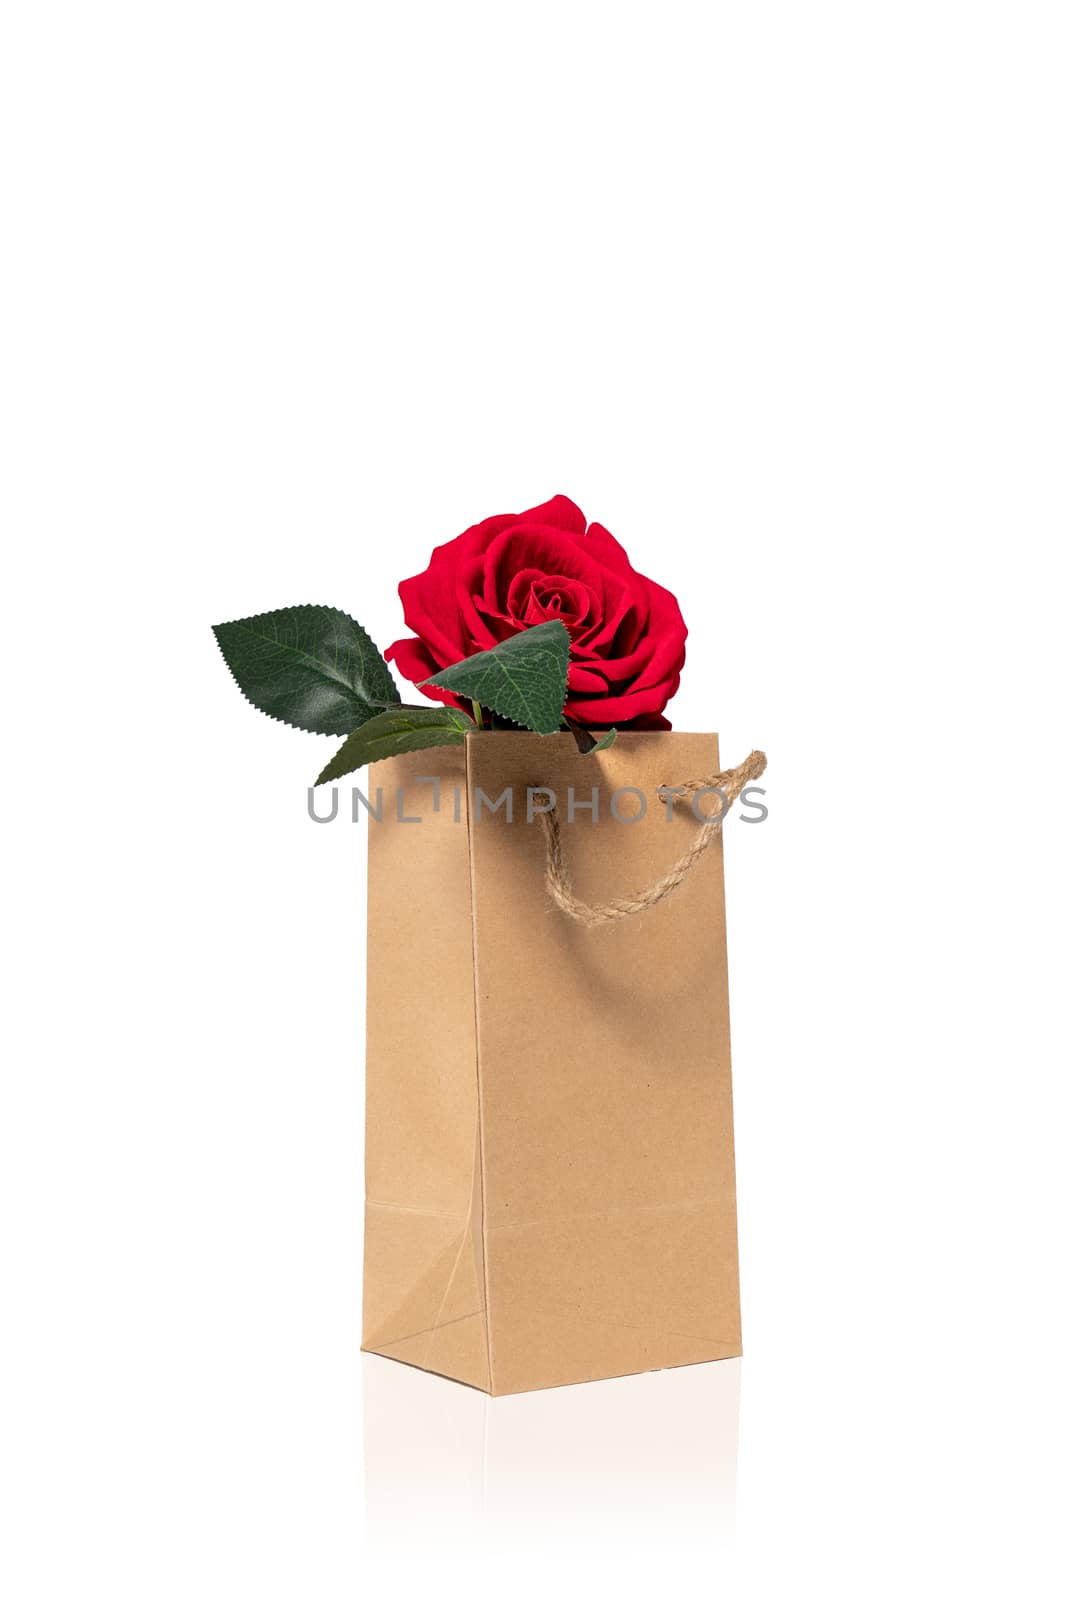 A beautiful single blooming red silk rose in a brown paper bag. Isolated with reflection on white background.